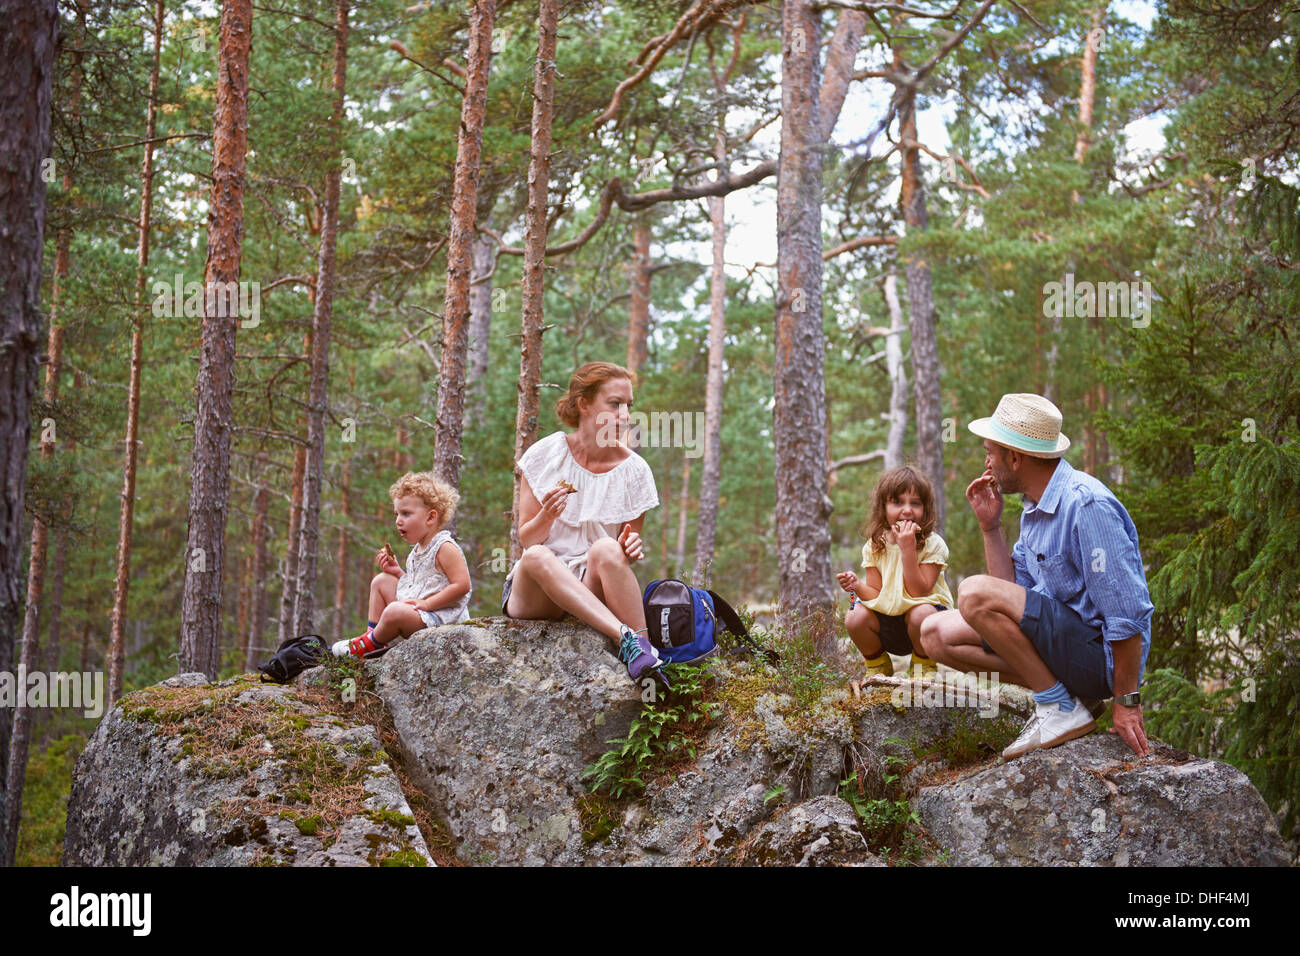 Family sitting on rocks in forest eating picnic Stock Photo